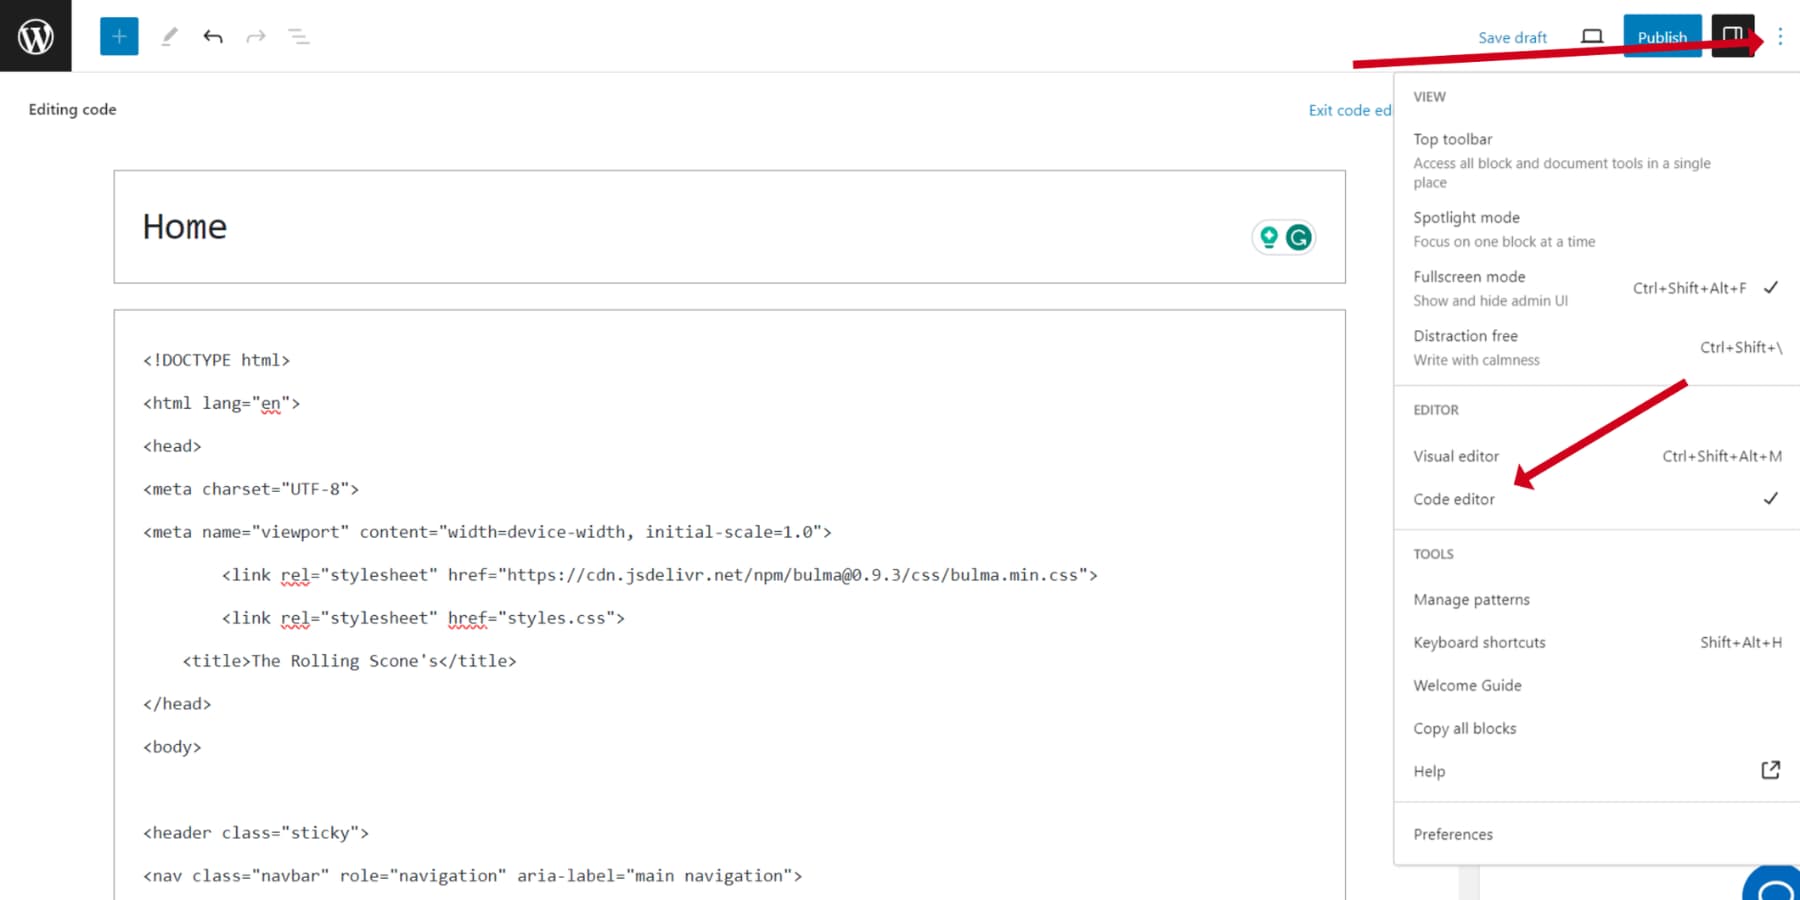 A screenshot of the WordPress' Code Editing mode with code generated by ChatGPT